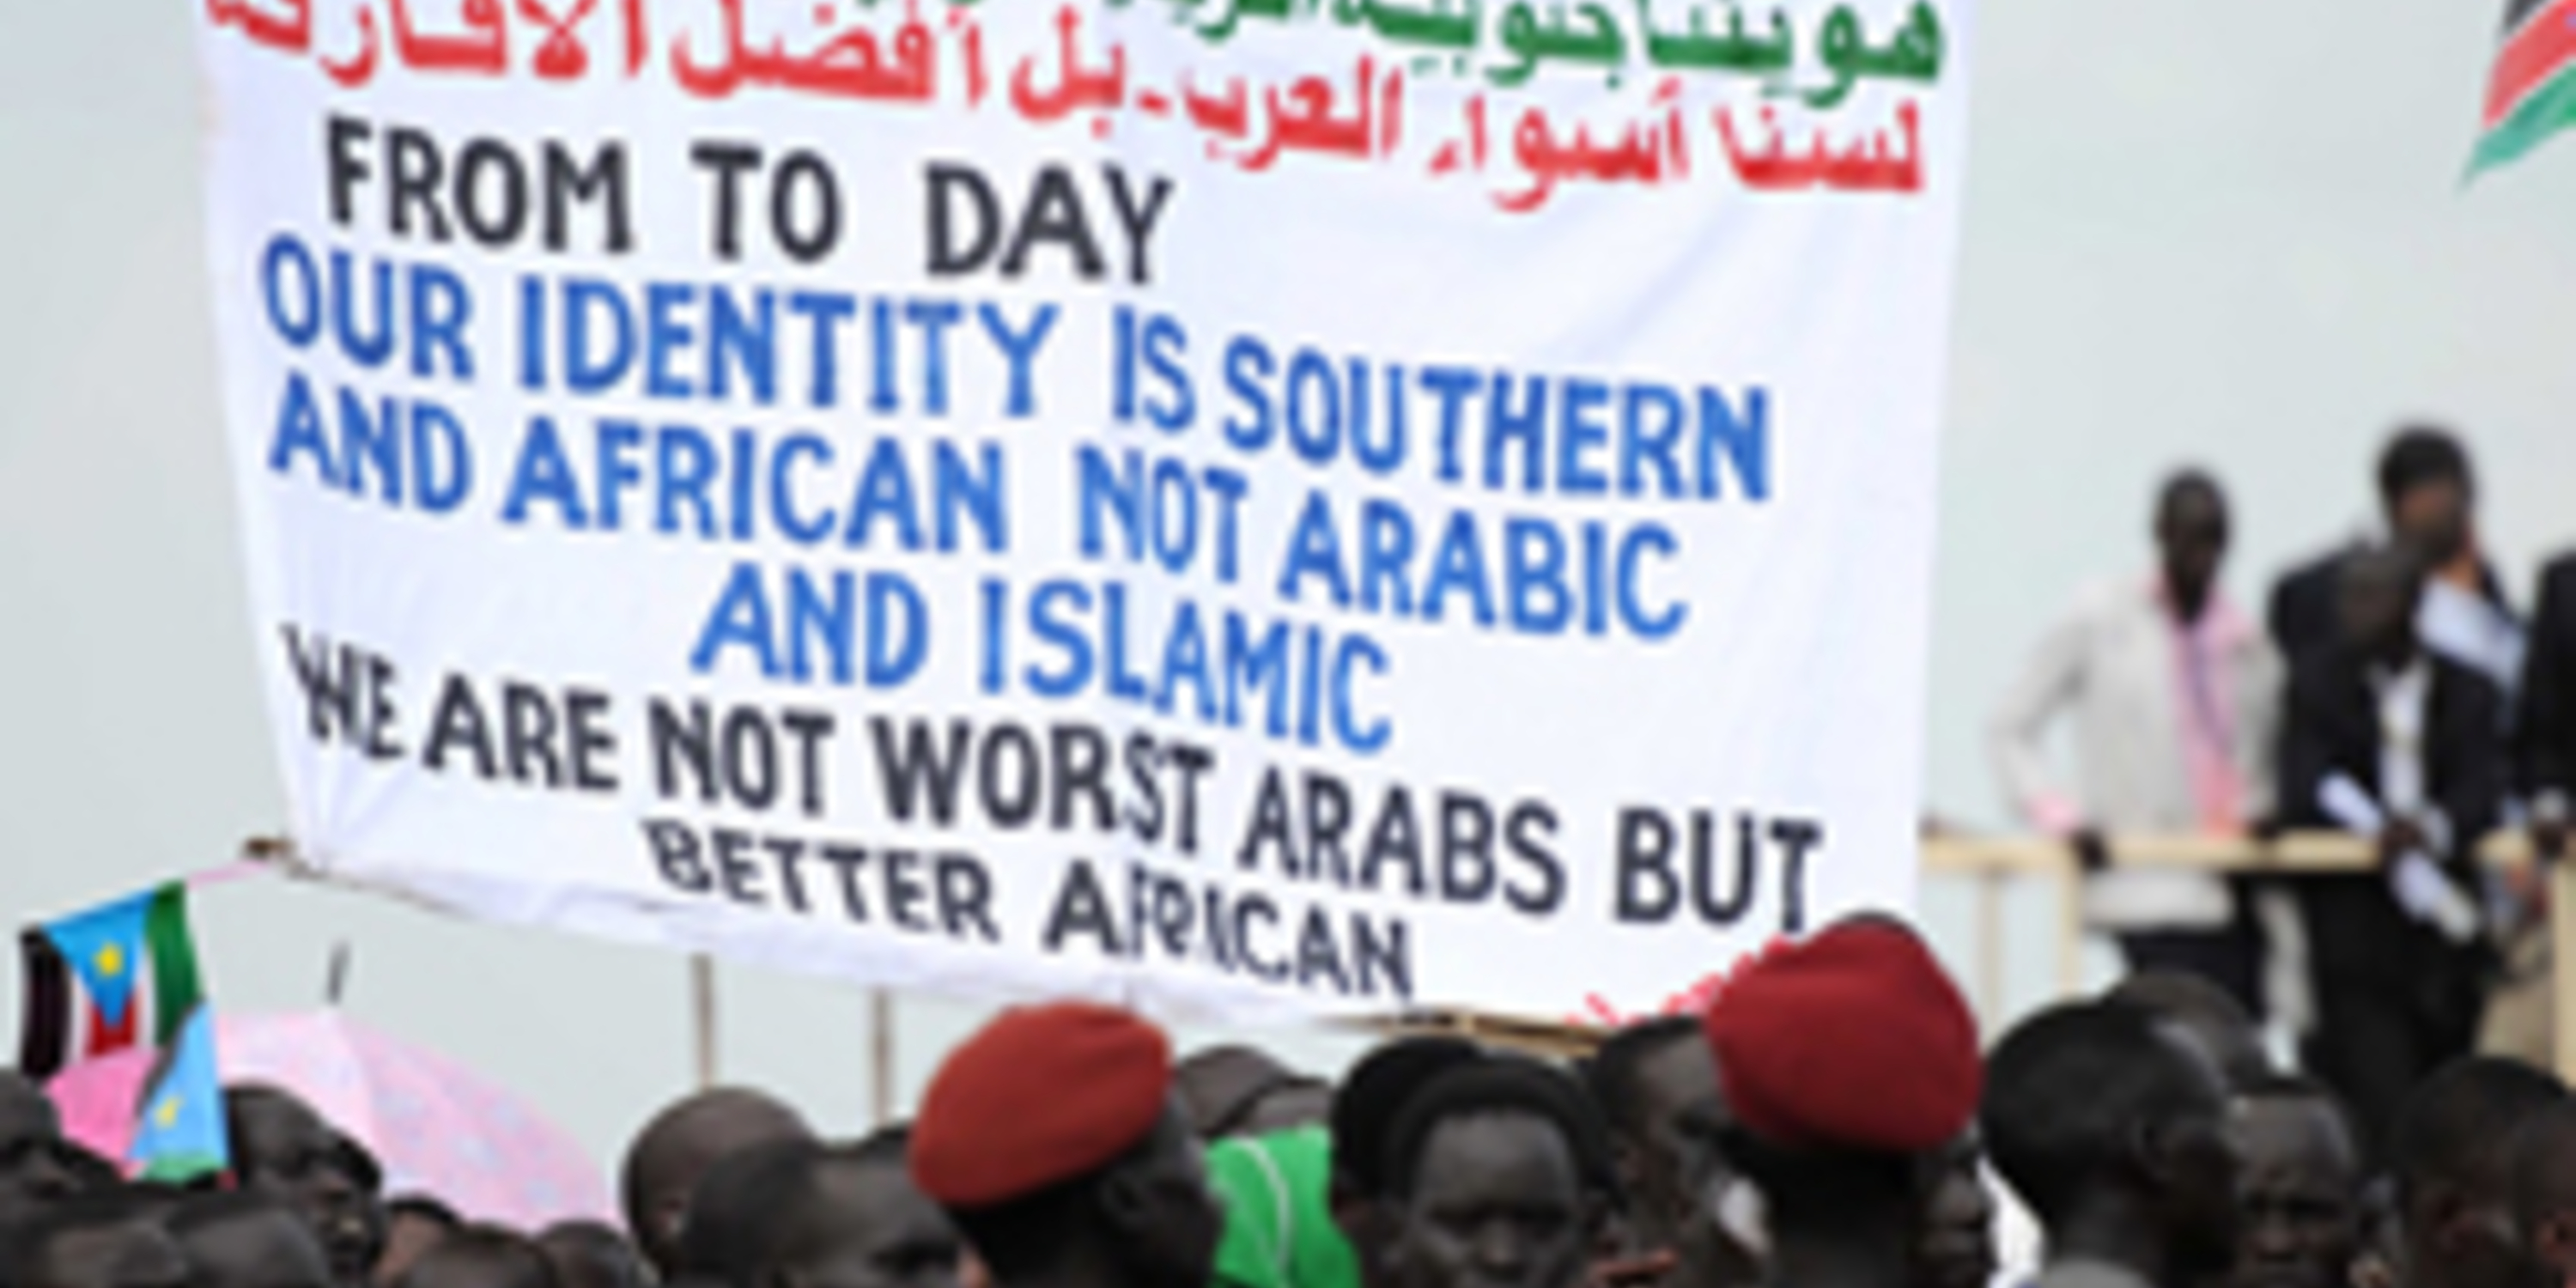 people holding sign - from today our identity is Southern and African not Arabic and Islamic